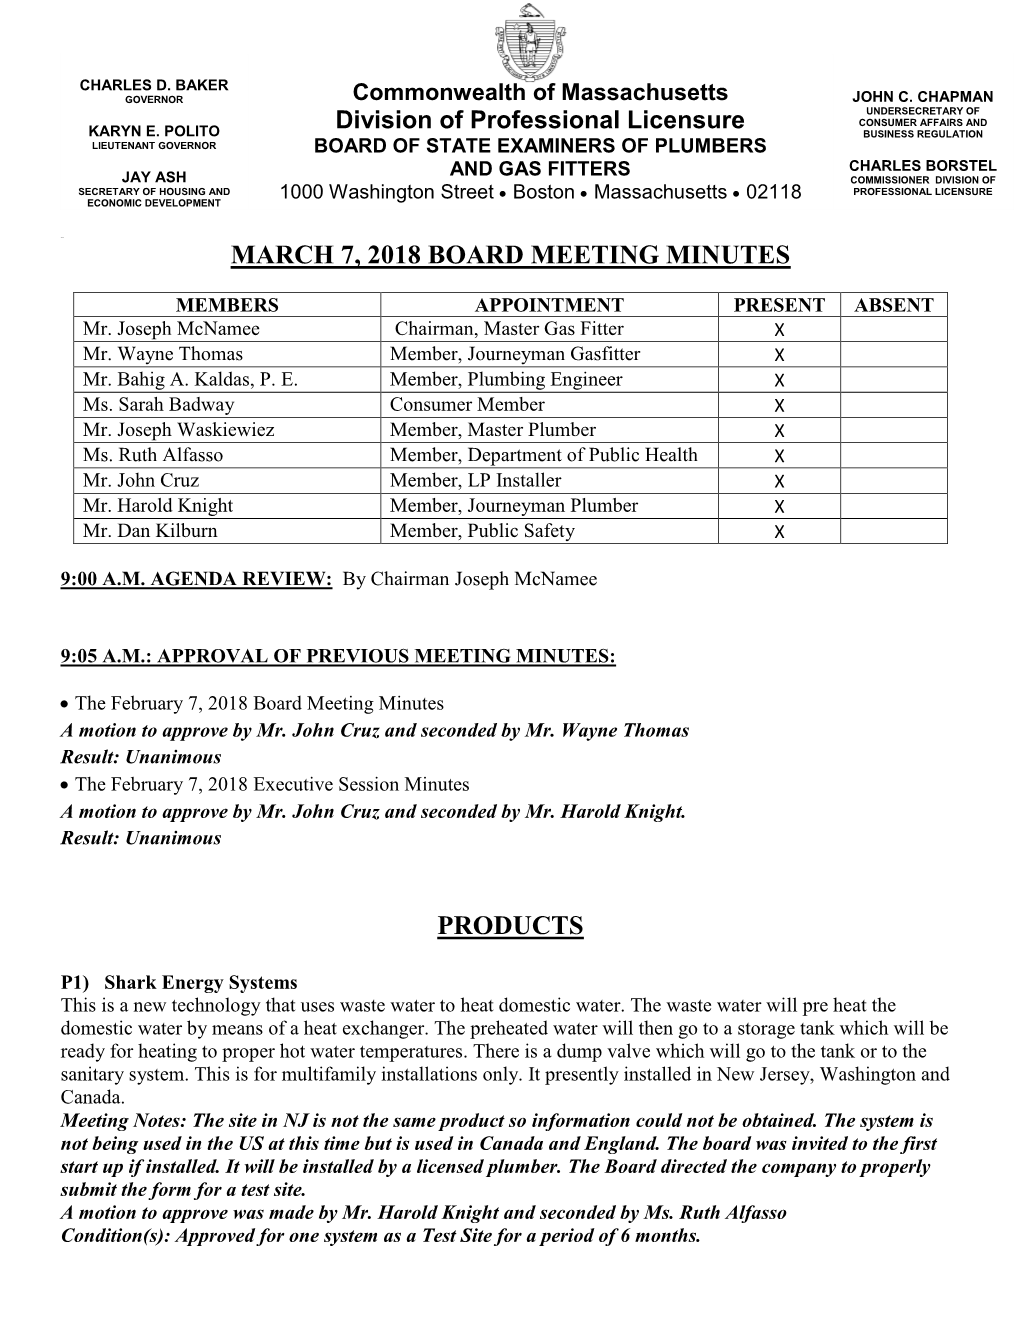 March 7, 2018 Board Meeting Minutes Products